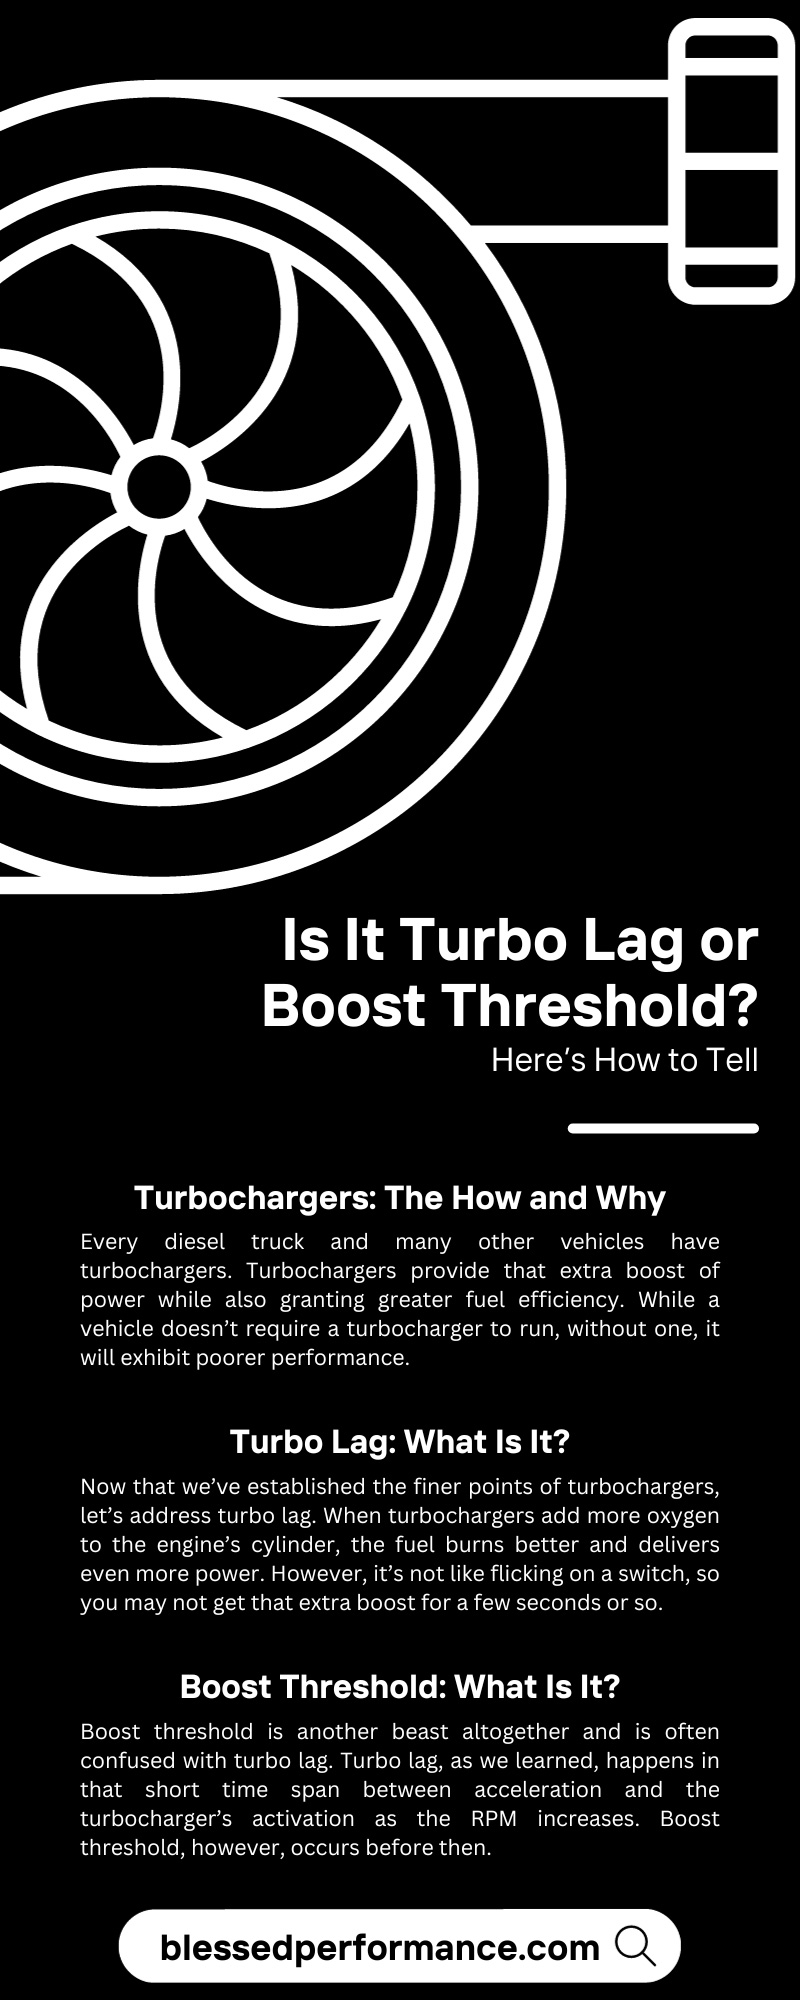 Is It Turbo Lag or Boost Threshold? Here’s How to Tell